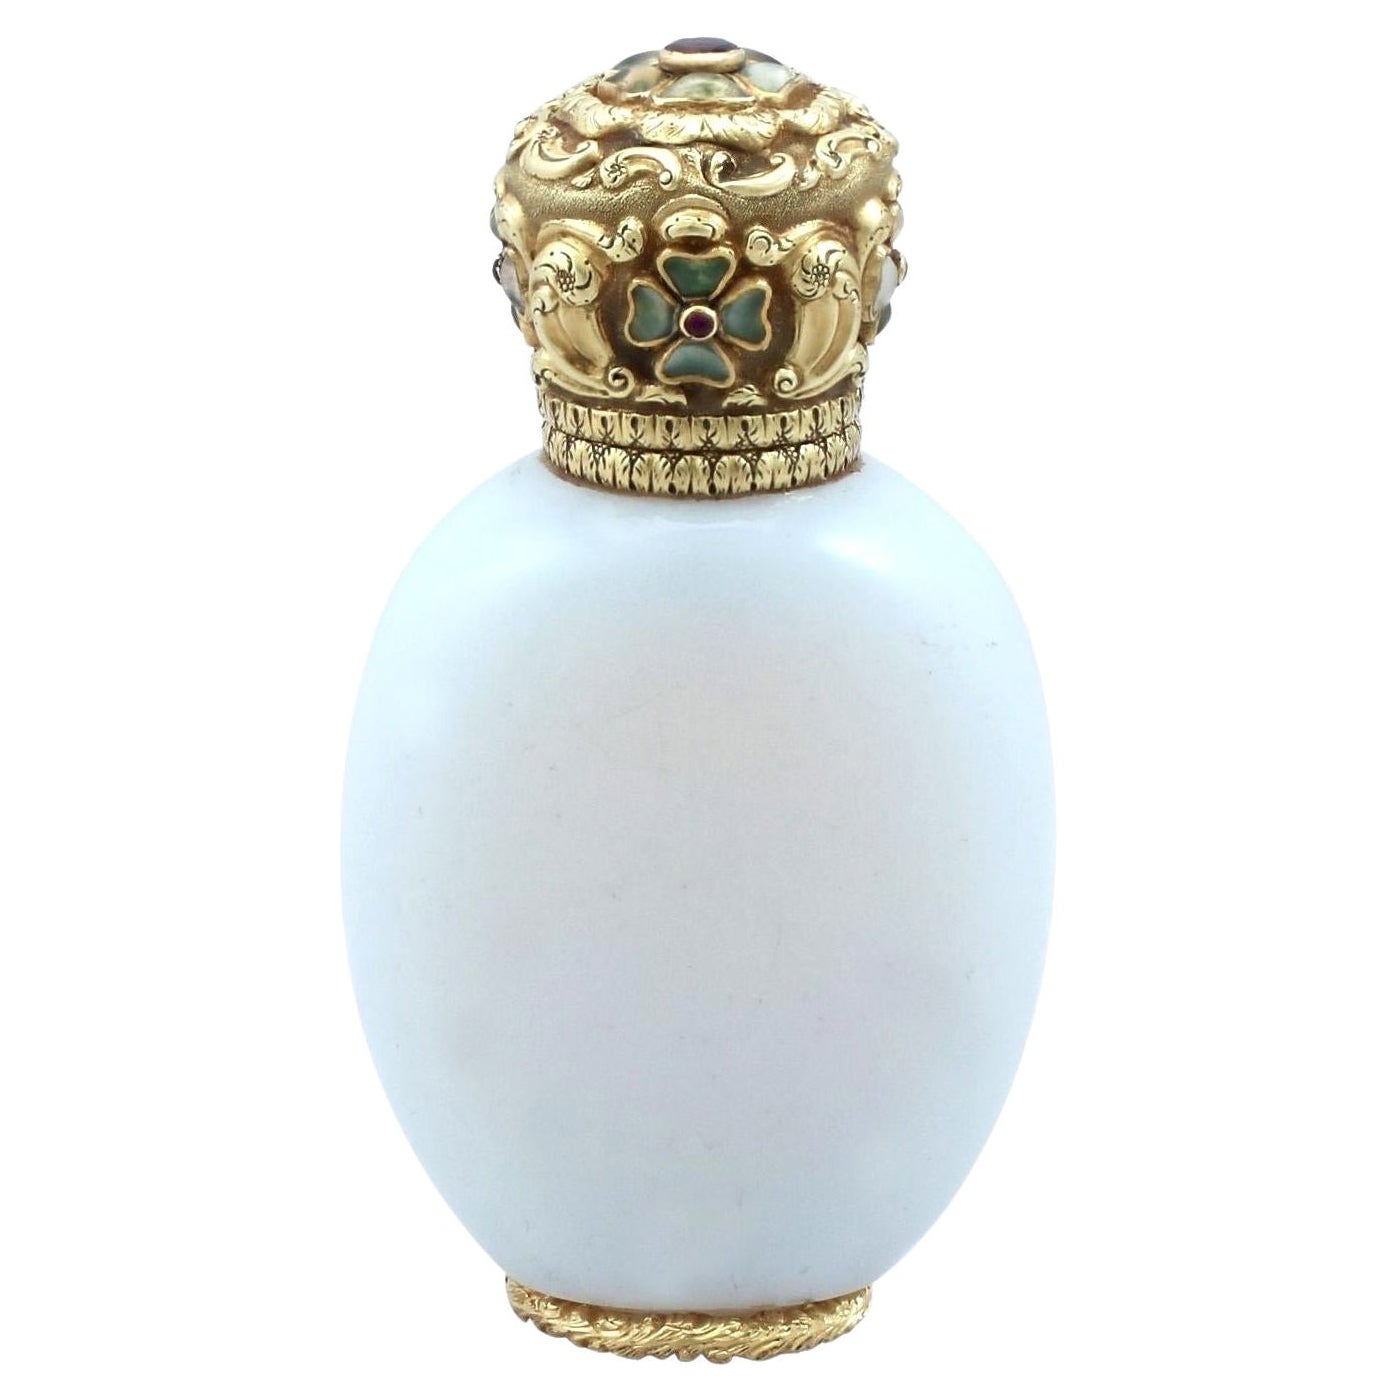 Antique Yellow Gold, Garnet, Ruby, Hardstone and Glass Scent Bottle, circa 1845